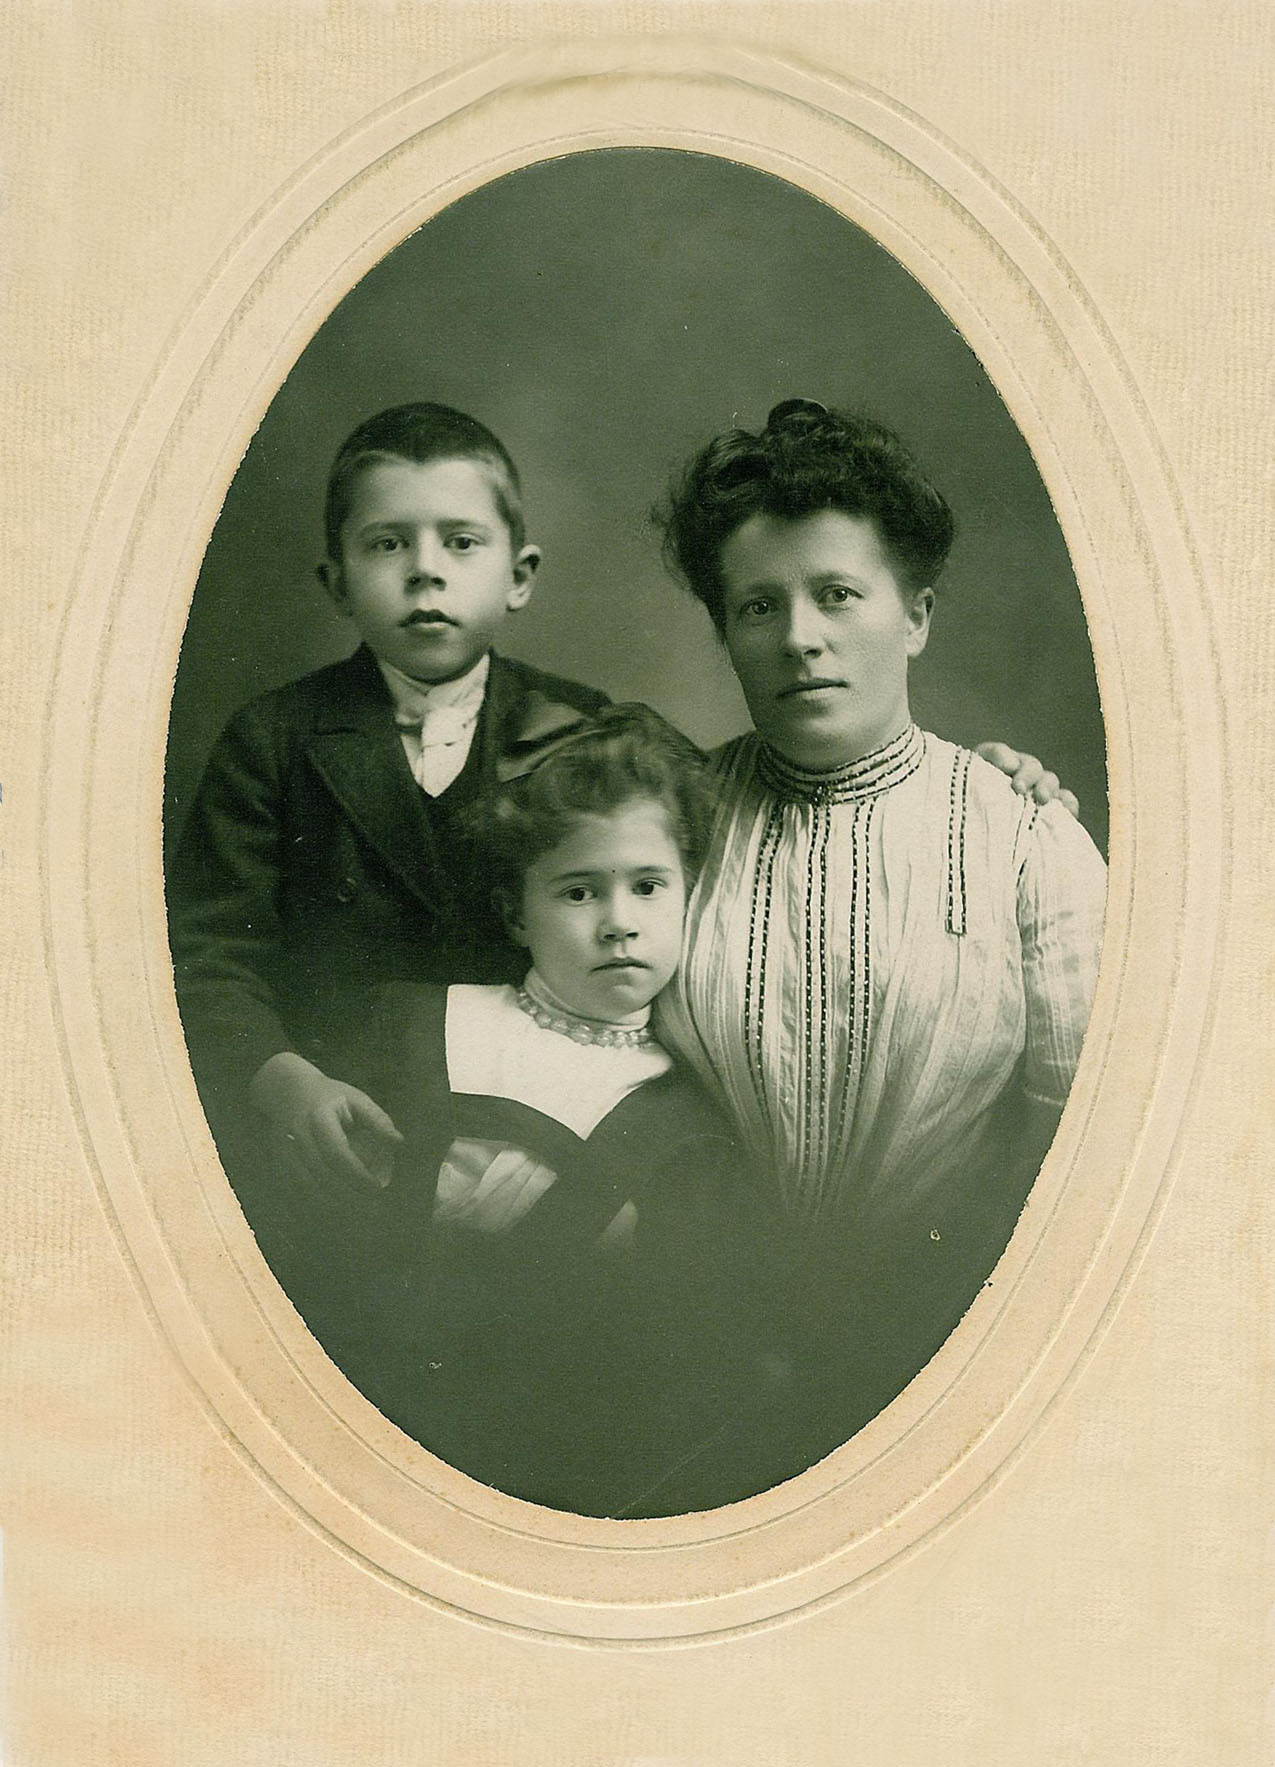 Photo of mother Emma Ericson with her young children Florence and Emery.